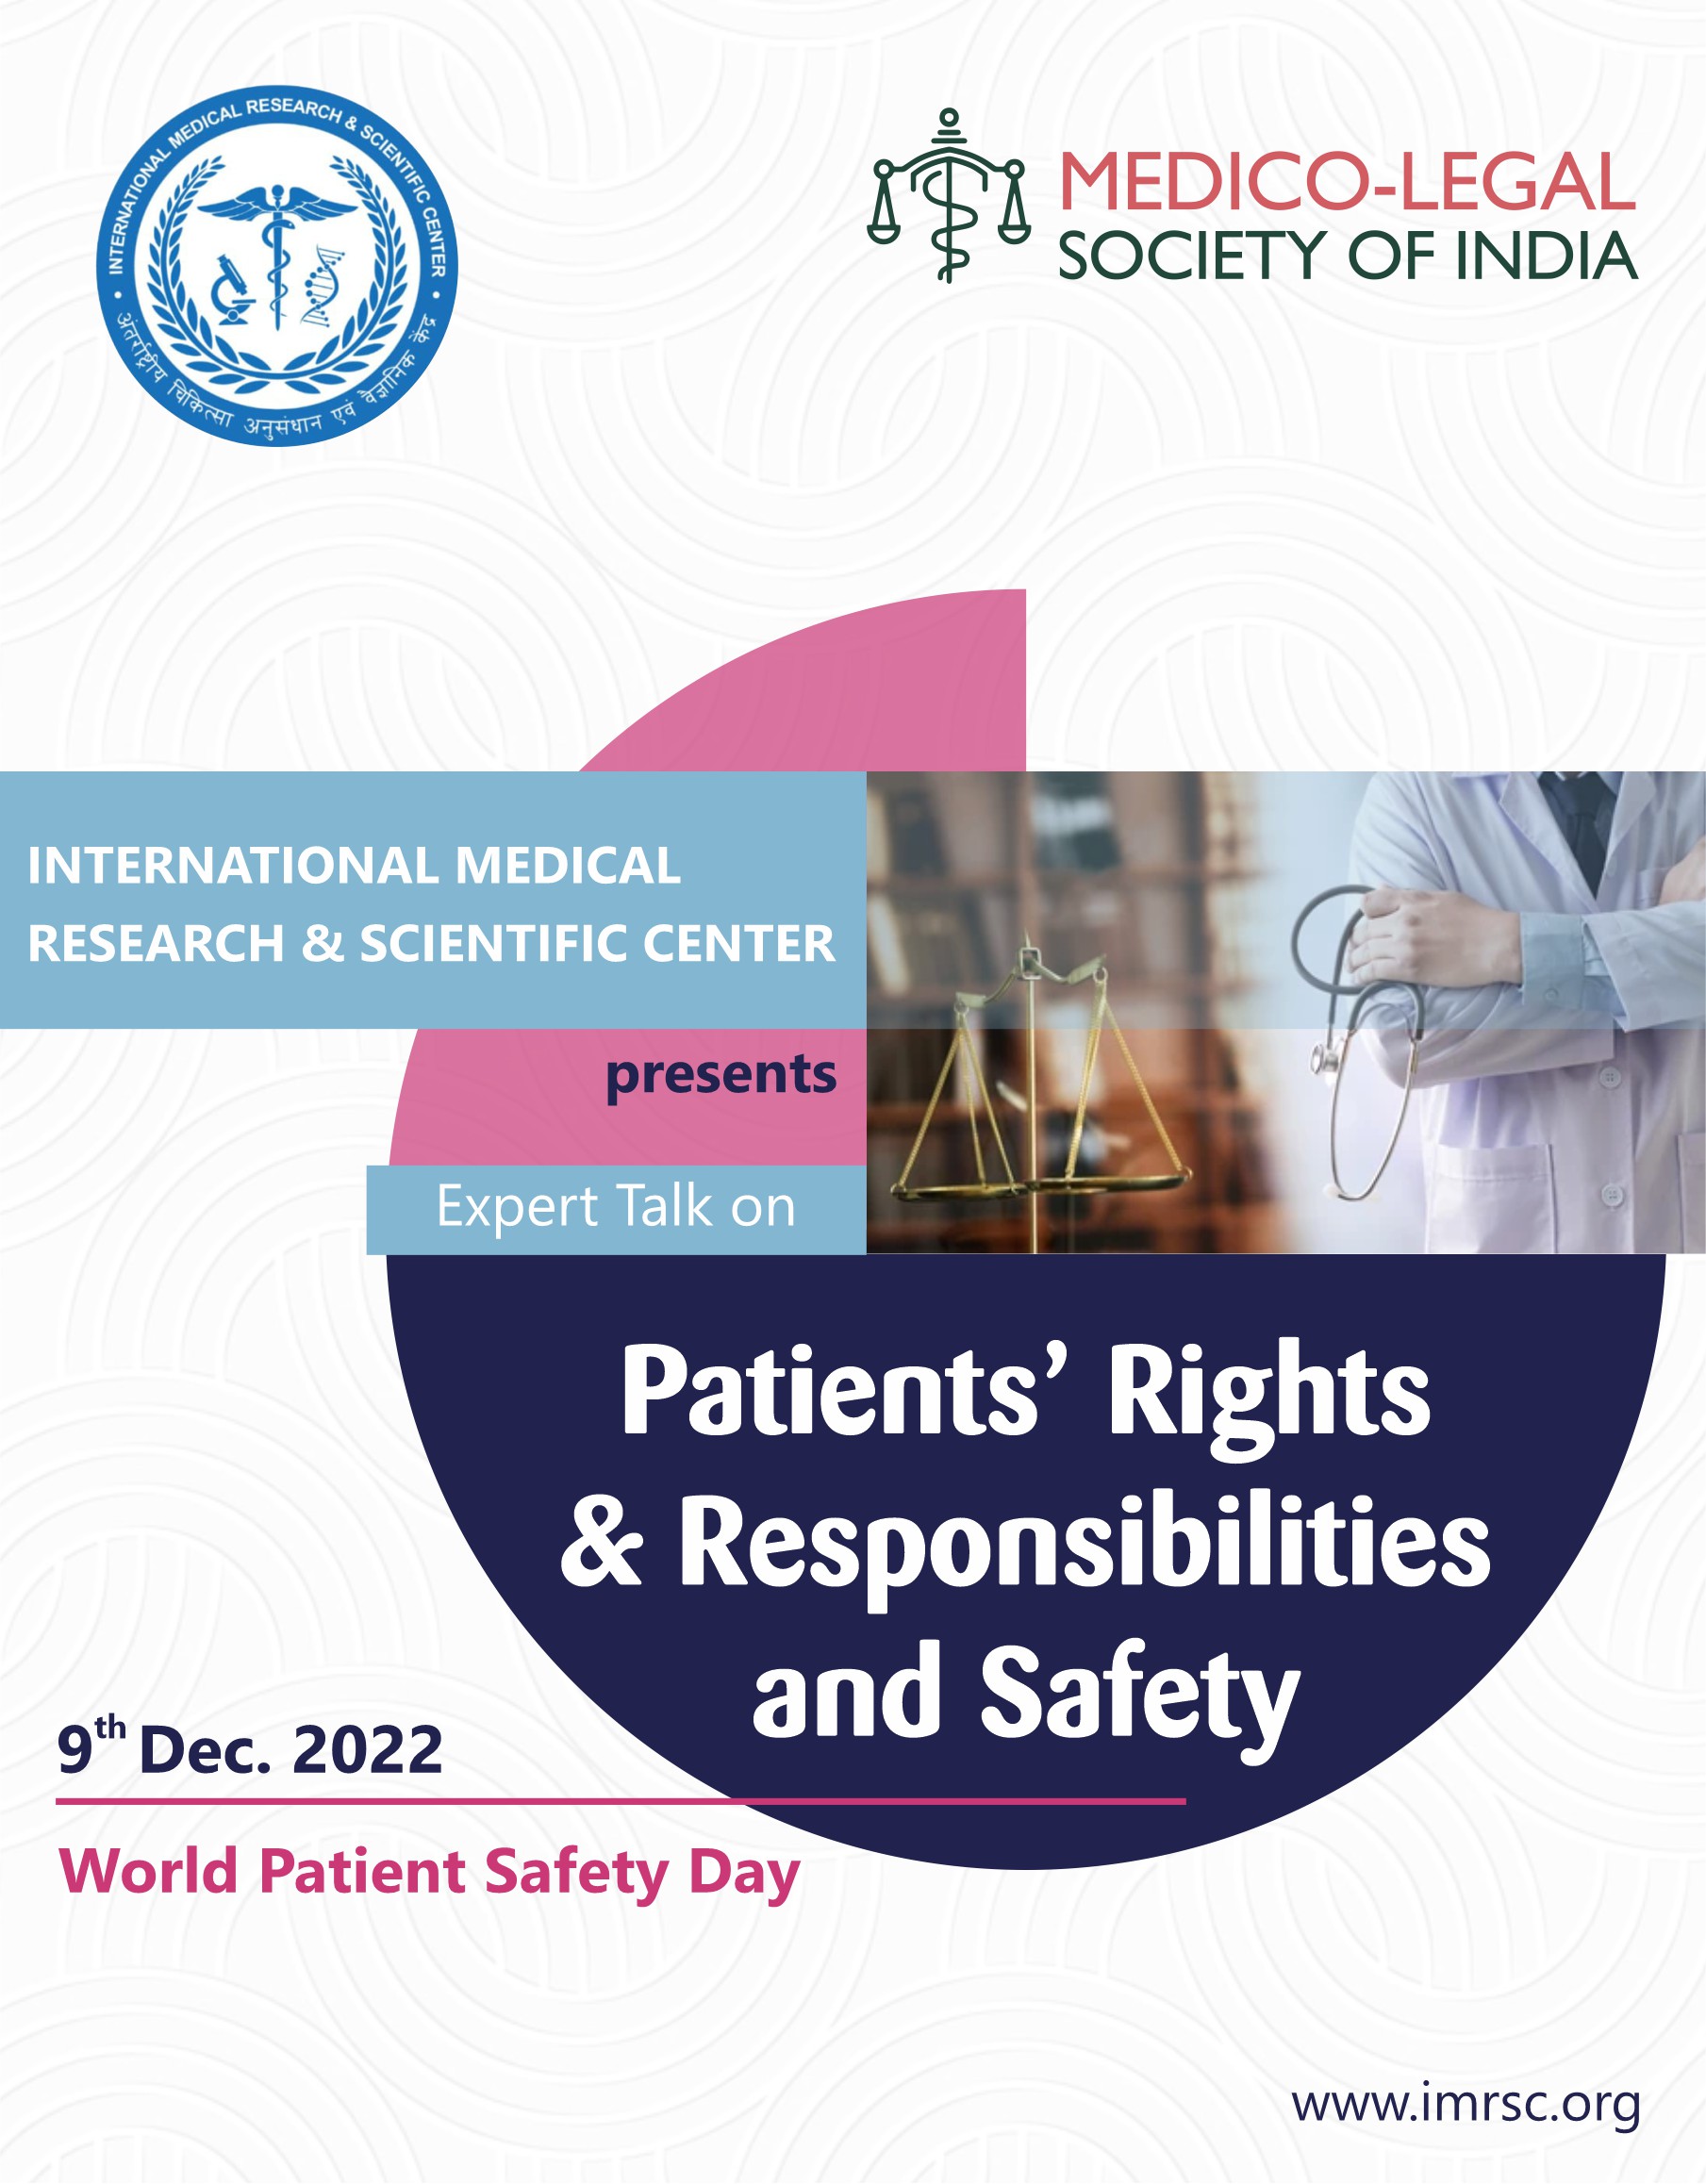 Patients' Rights & Responsibilities and Safety